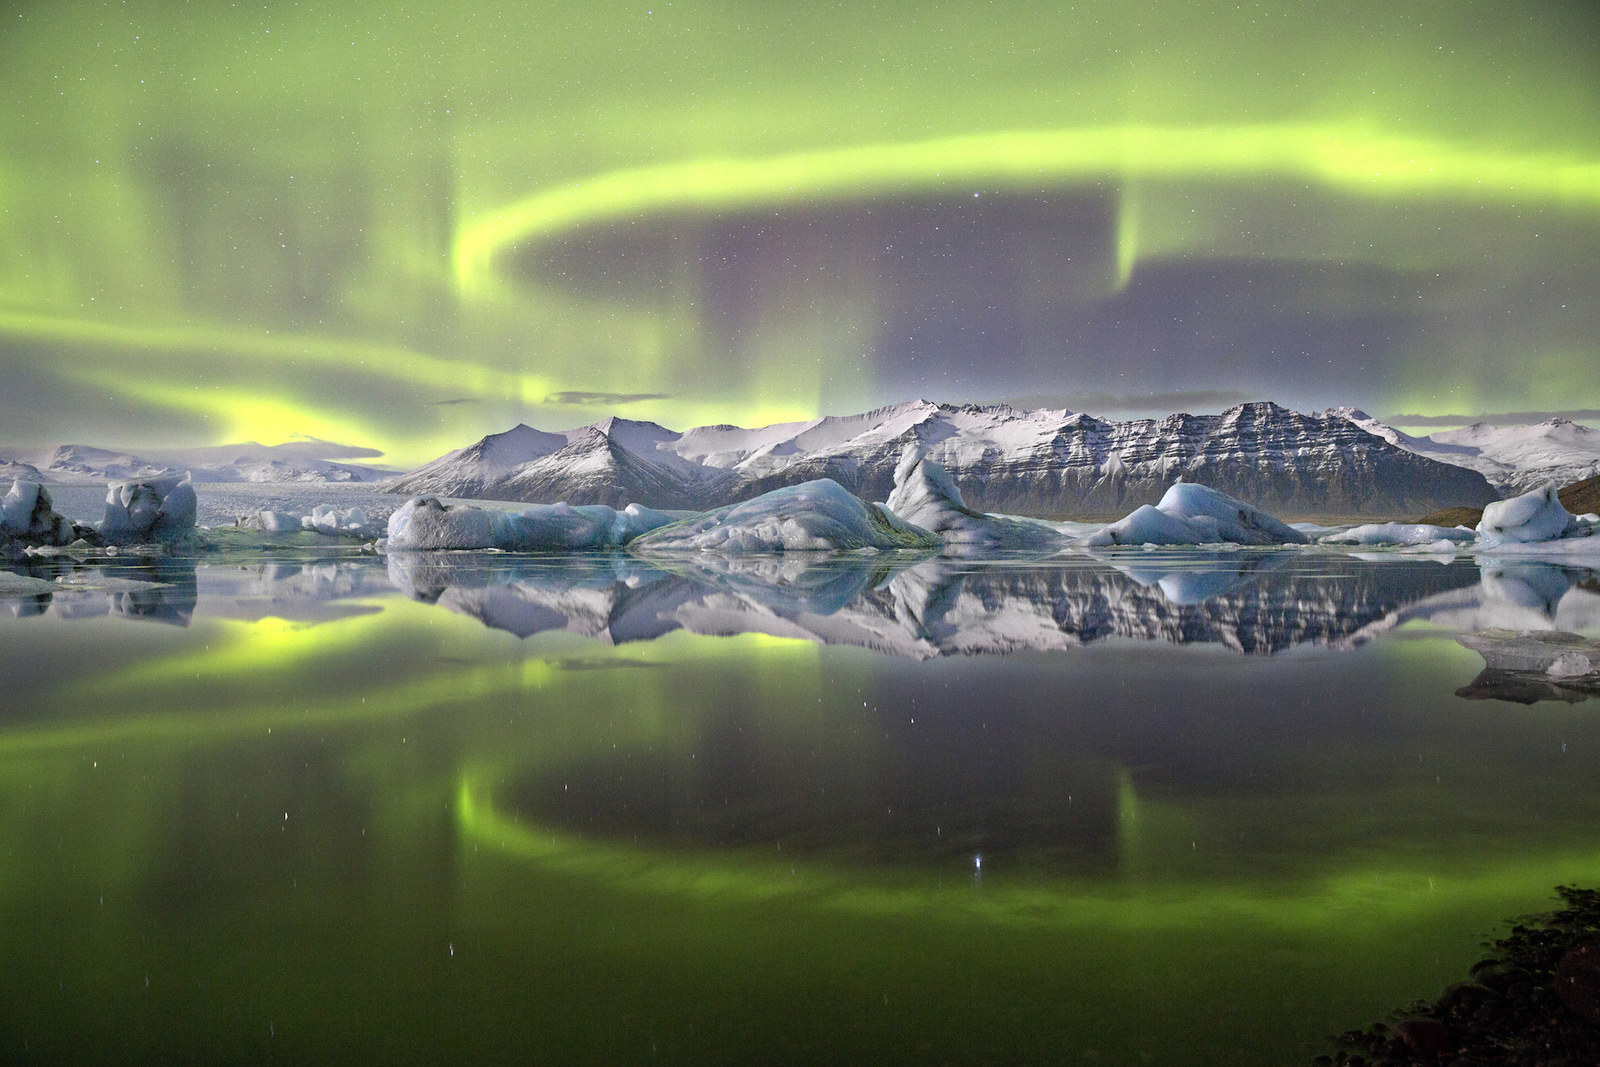 Overall winner – "Aurora Over a Glacier Lagoon" by James Woodend